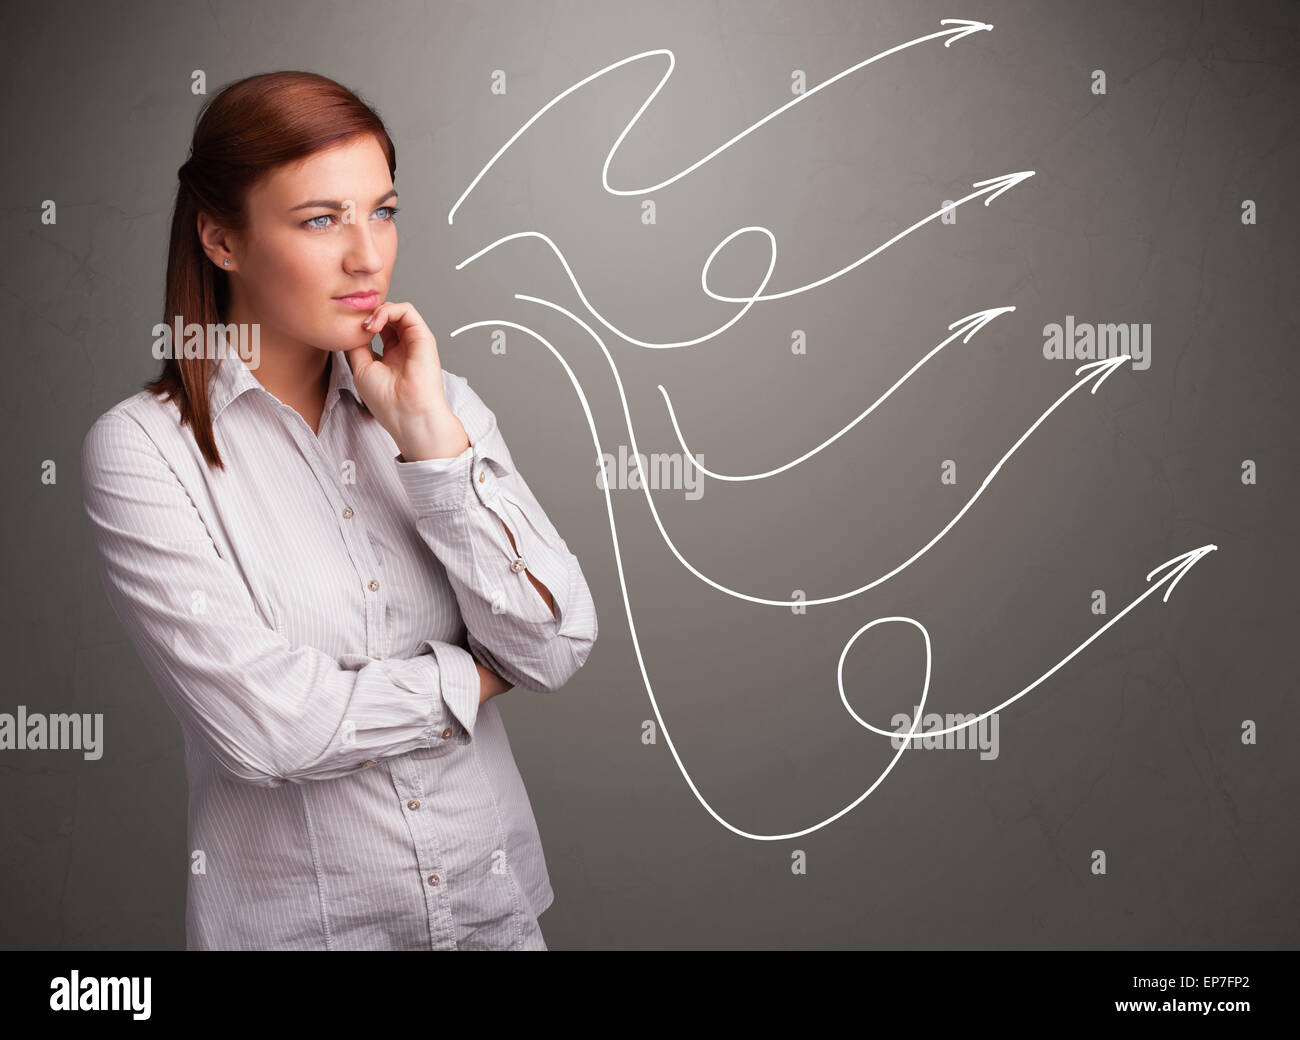 Attractive teenager looking at multiple curly arrows Stock Photo